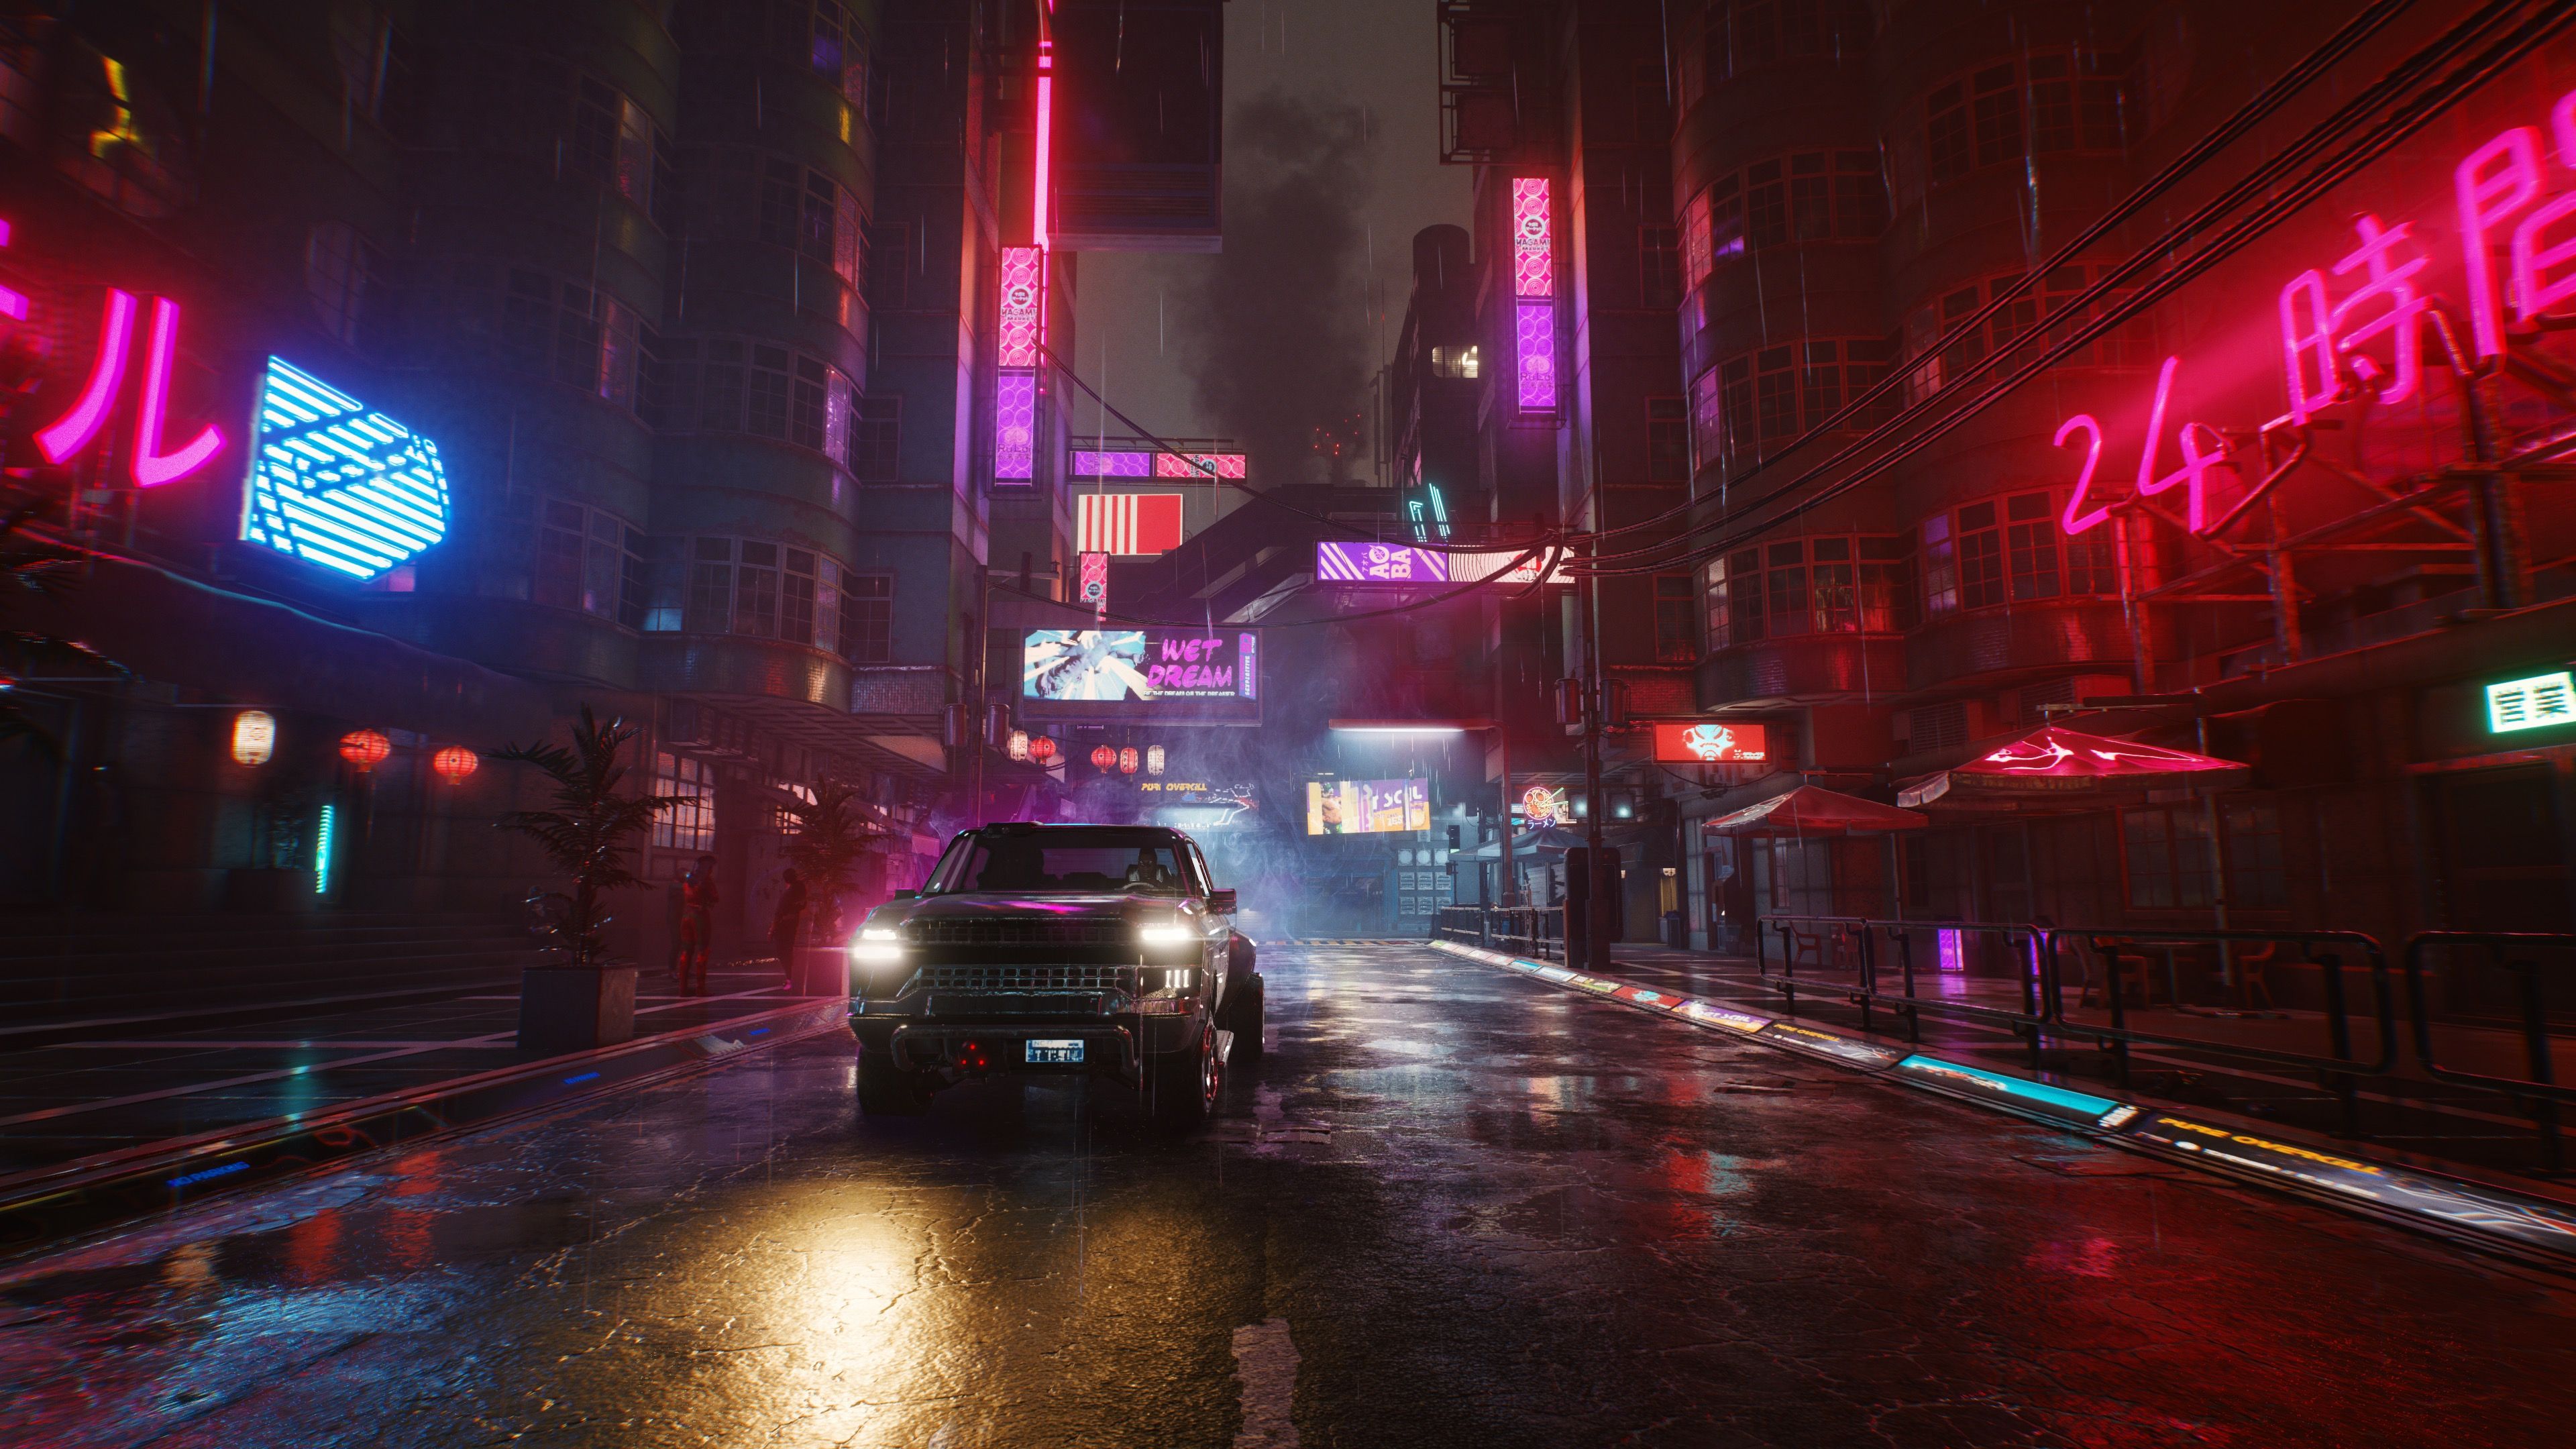 4K Cybrpunk Theme Wallpapers : Cyberpunk Street Neon Night Lights 4k Hd Games 4k Wallpapers Image Backgrounds Photos And Pictures / A collection of the top 26 cyberpunk 4k wallpapers and backgrounds